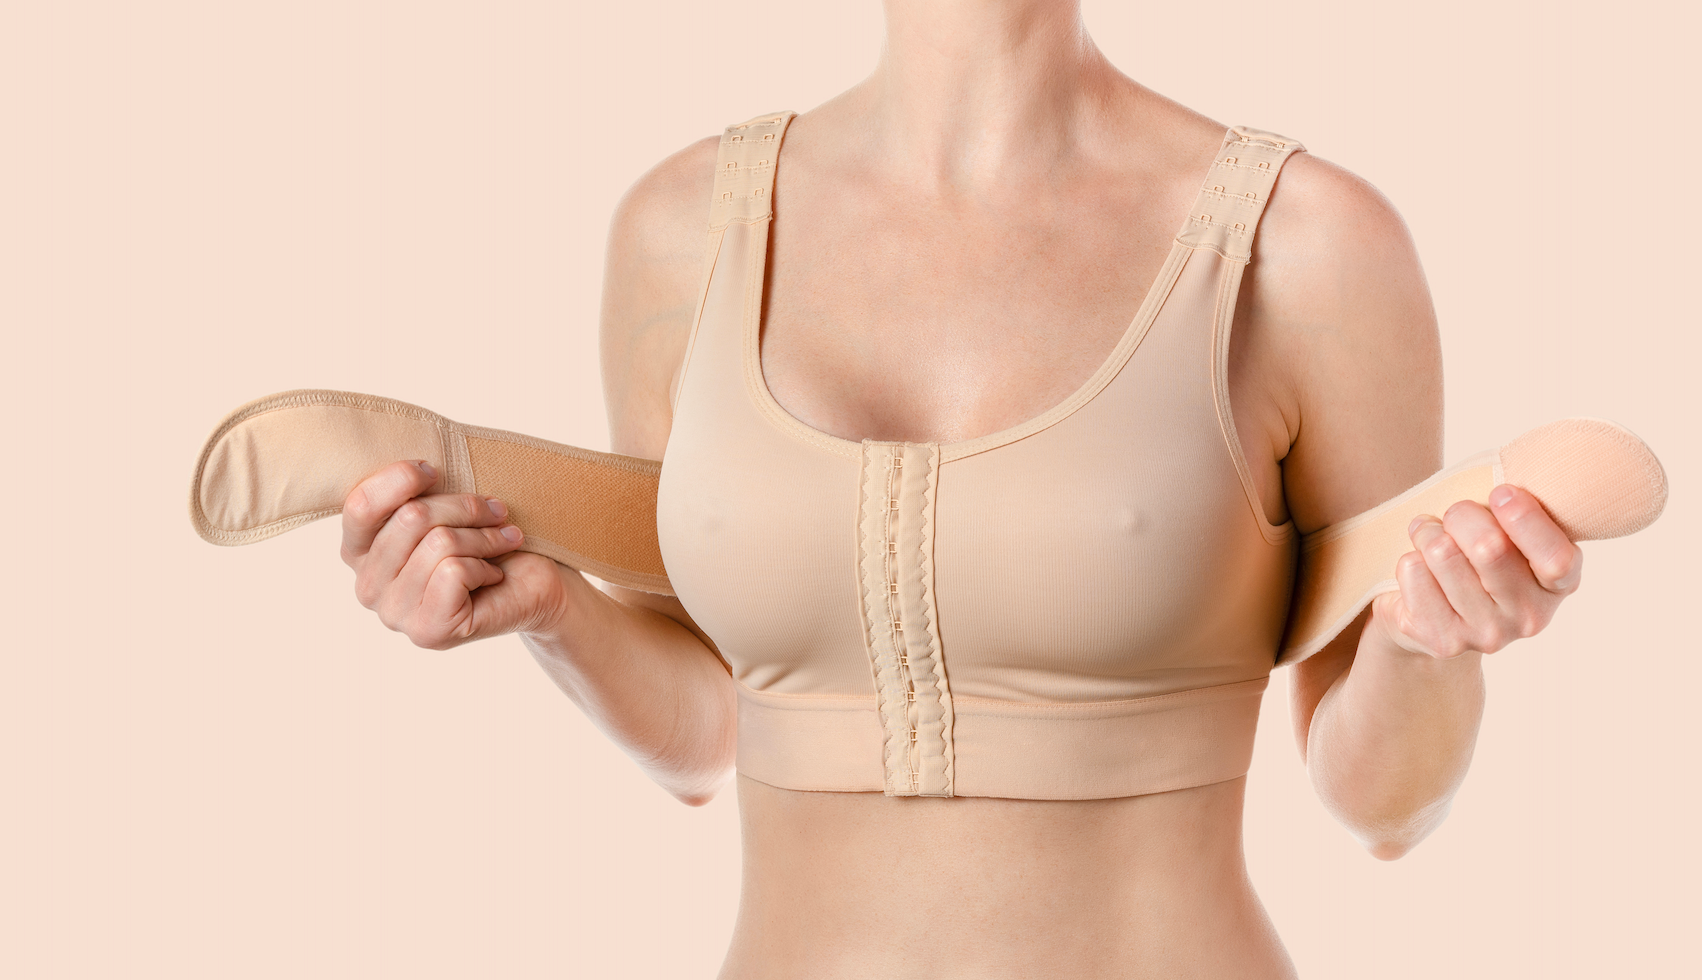 Optimise Your Plastic Surgery Recovery with Post-Op Garments